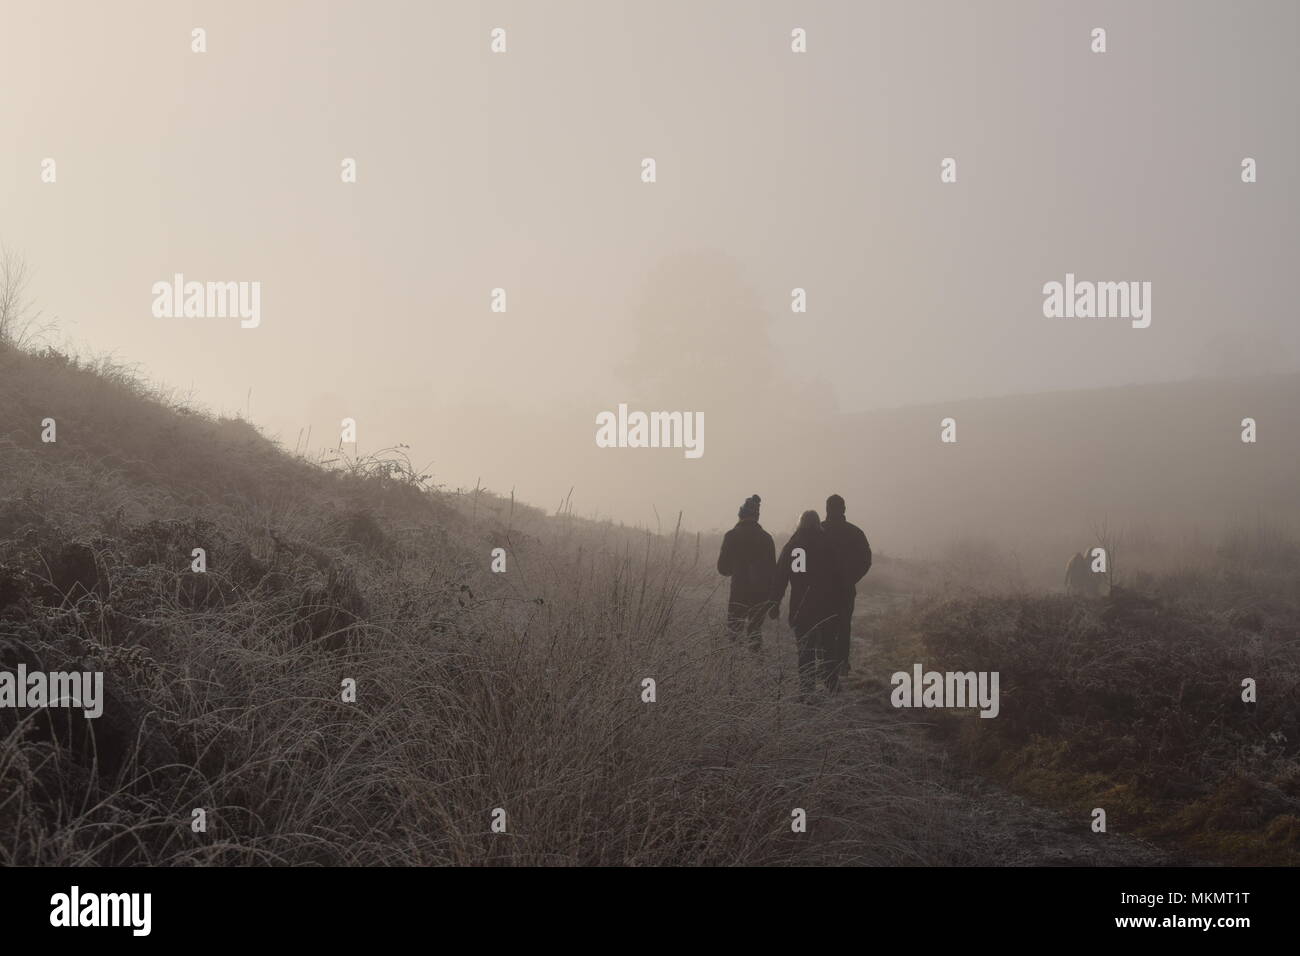 Silhouette of three people walking on a foggy morning at Cannock Chase Stock Photo